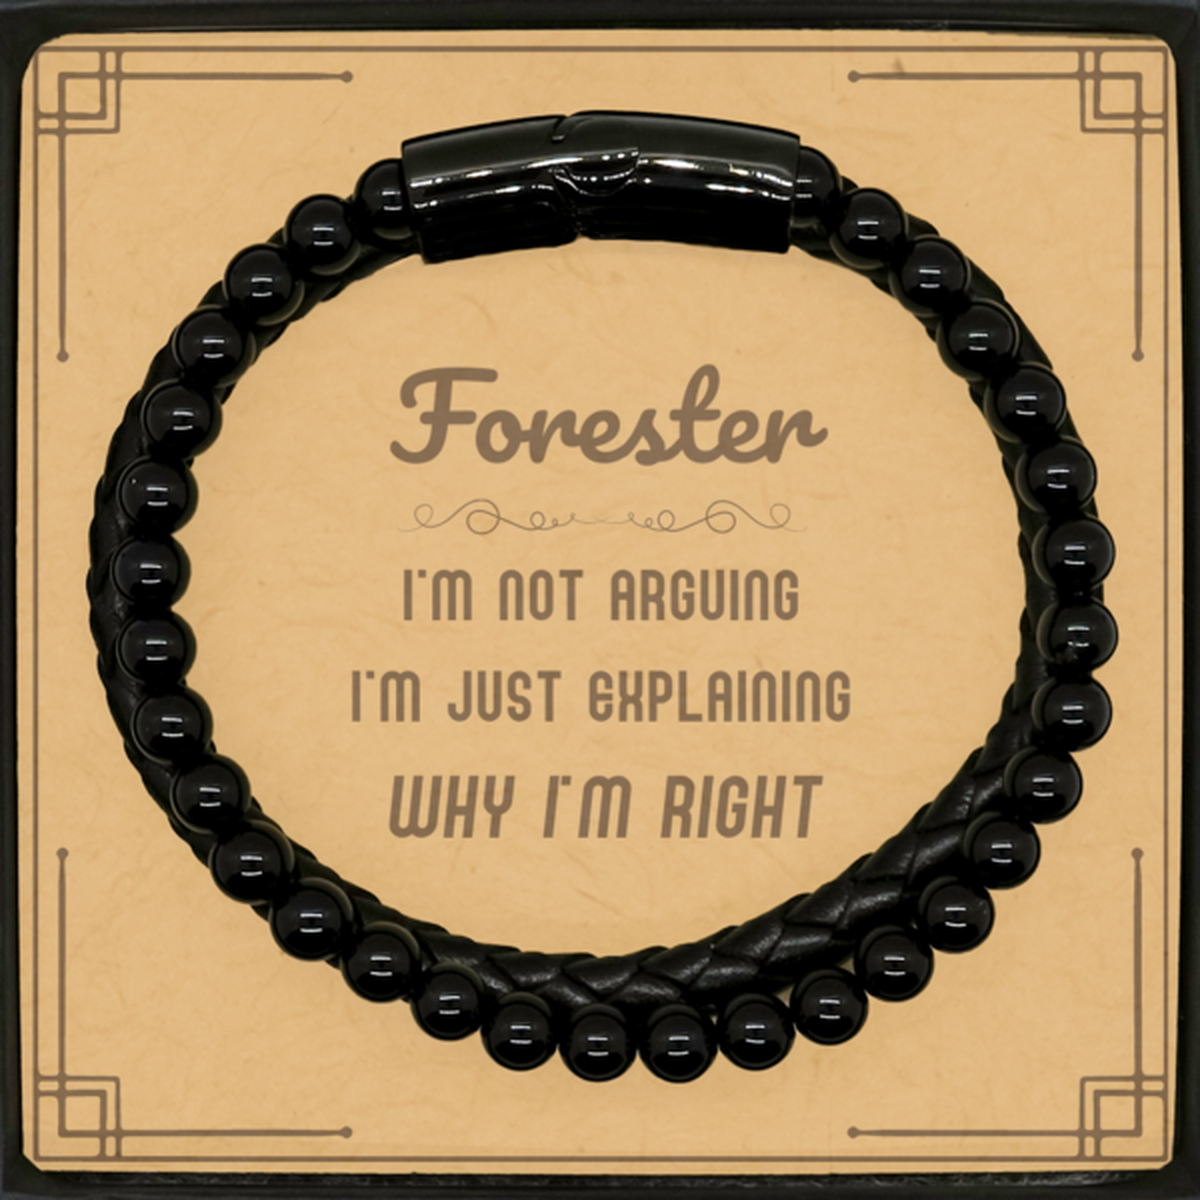 Forester I'm not Arguing. I'm Just Explaining Why I'm RIGHT Stone Leather Bracelets, Funny Saying Quote Forester Gifts For Forester Message Card Graduation Birthday Christmas Gifts for Men Women Coworker